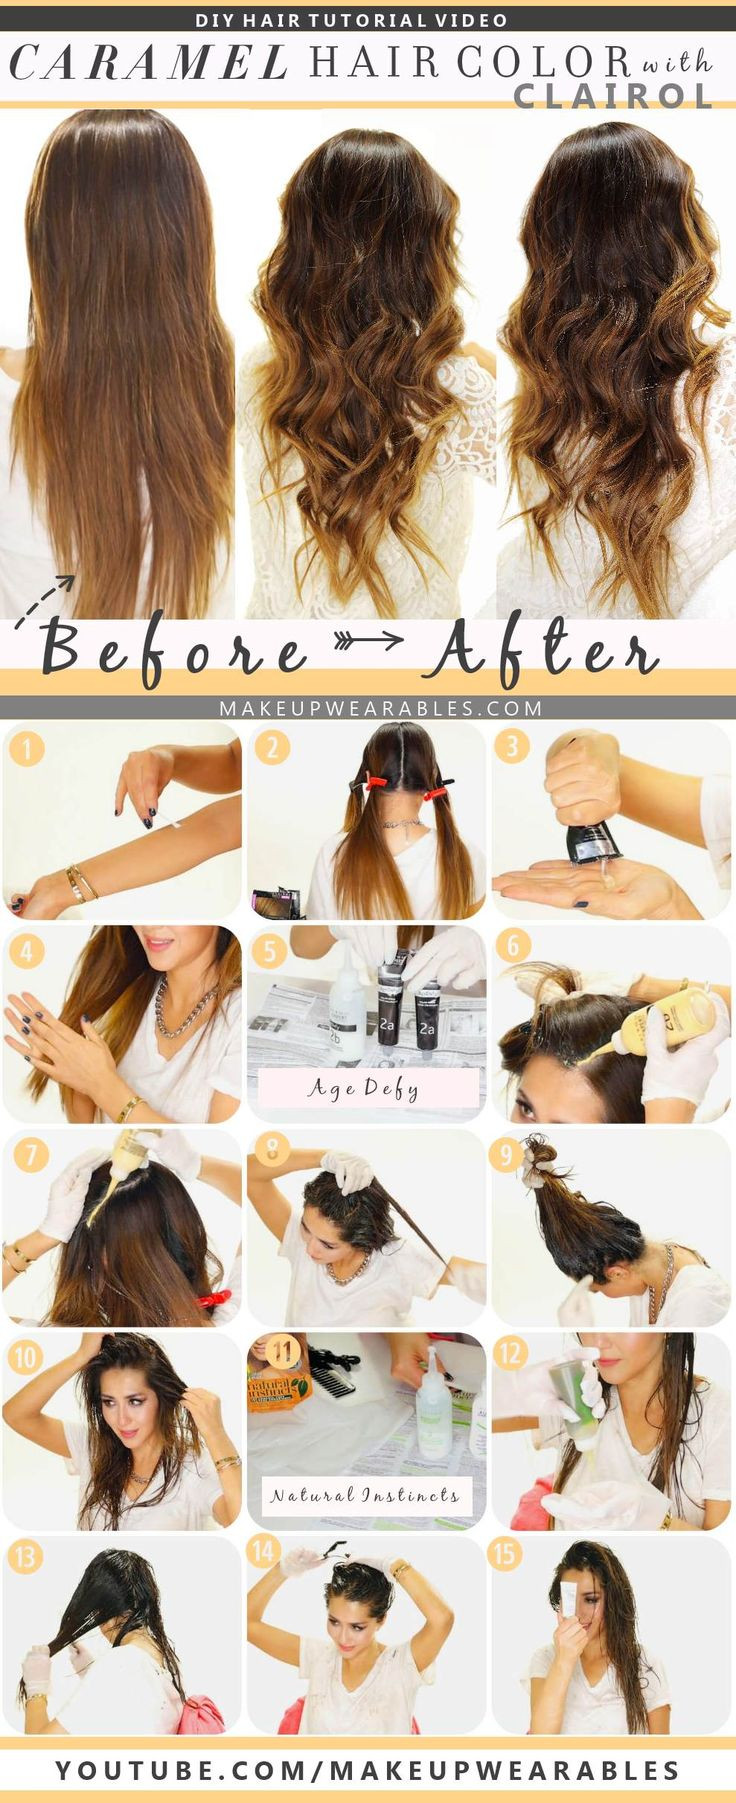 How To DIY Ombre Hair
 DIY Color your hair at home Caramel Brown Ombre